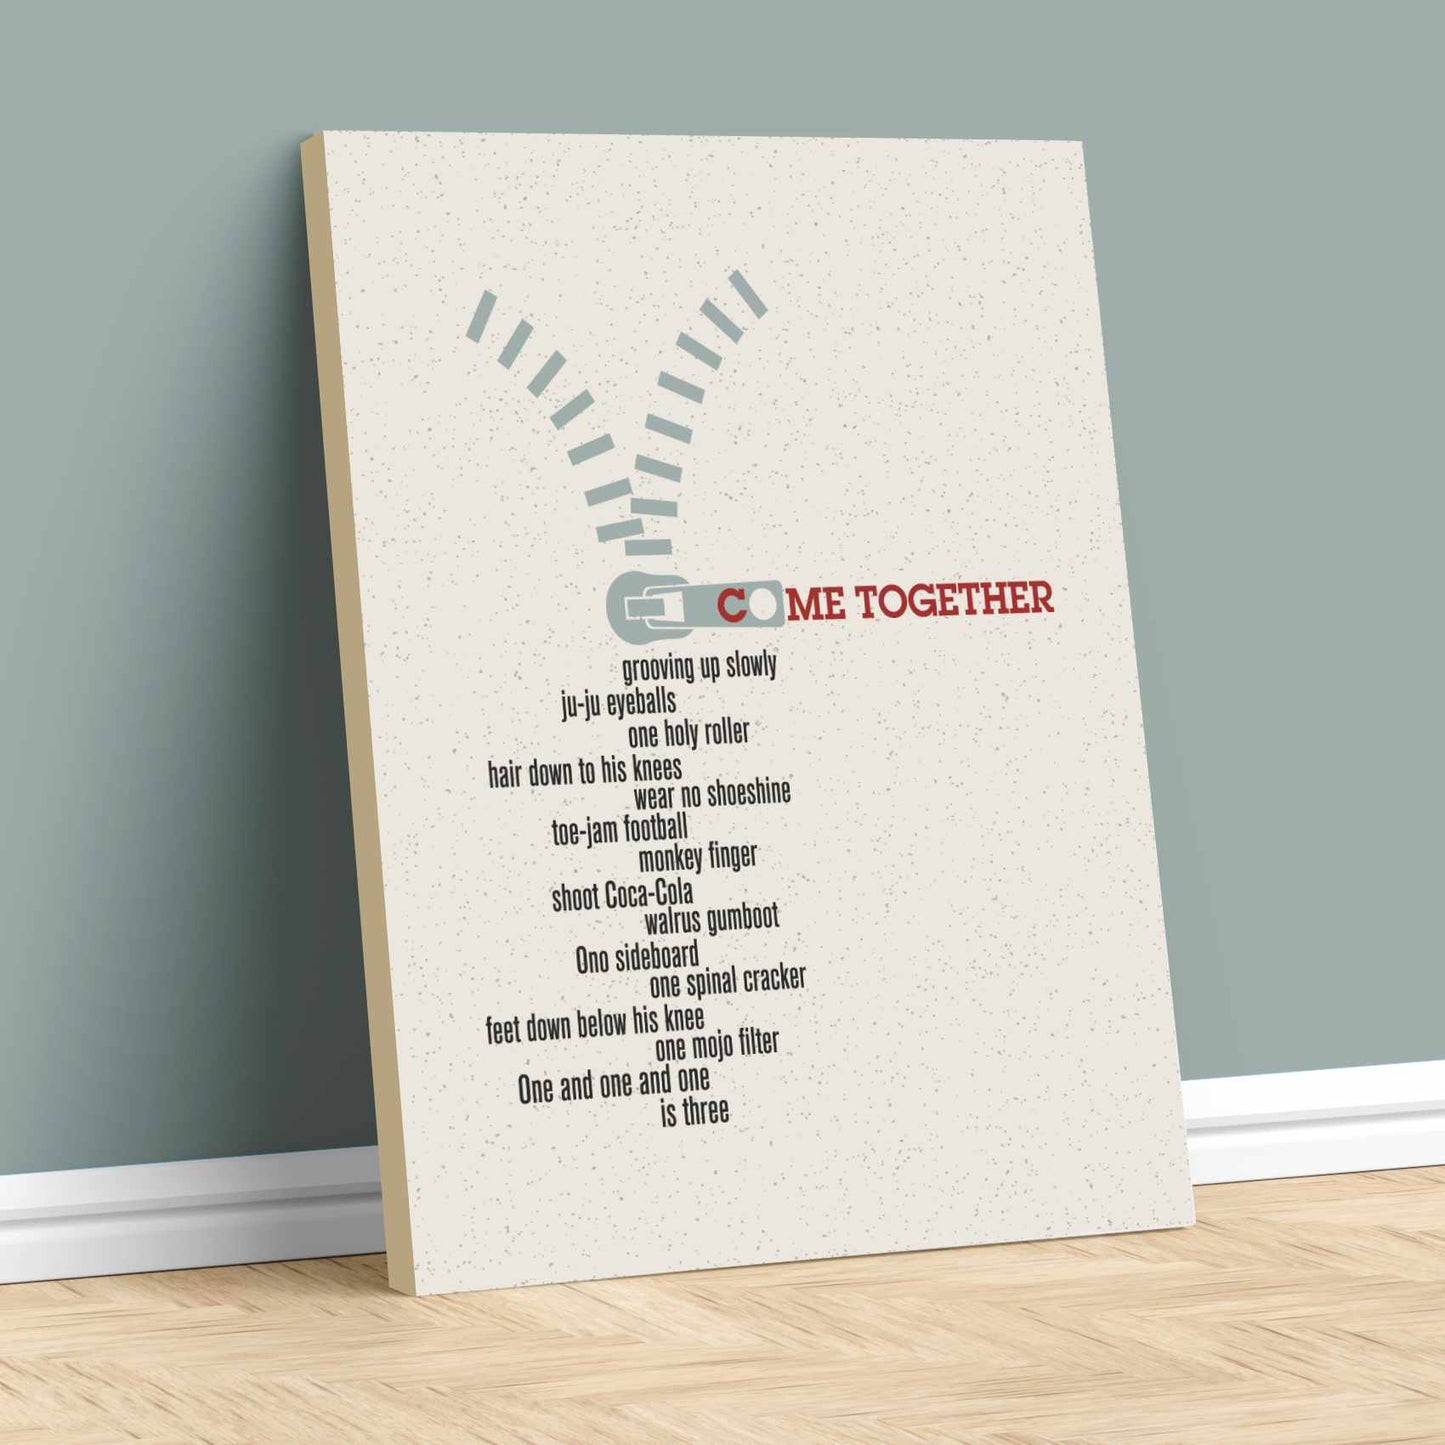 Come Together by the Beatles - Song Lyric Art Wall Print Song Lyrics Art Song Lyrics Art 11x14 Canvas Wrap 